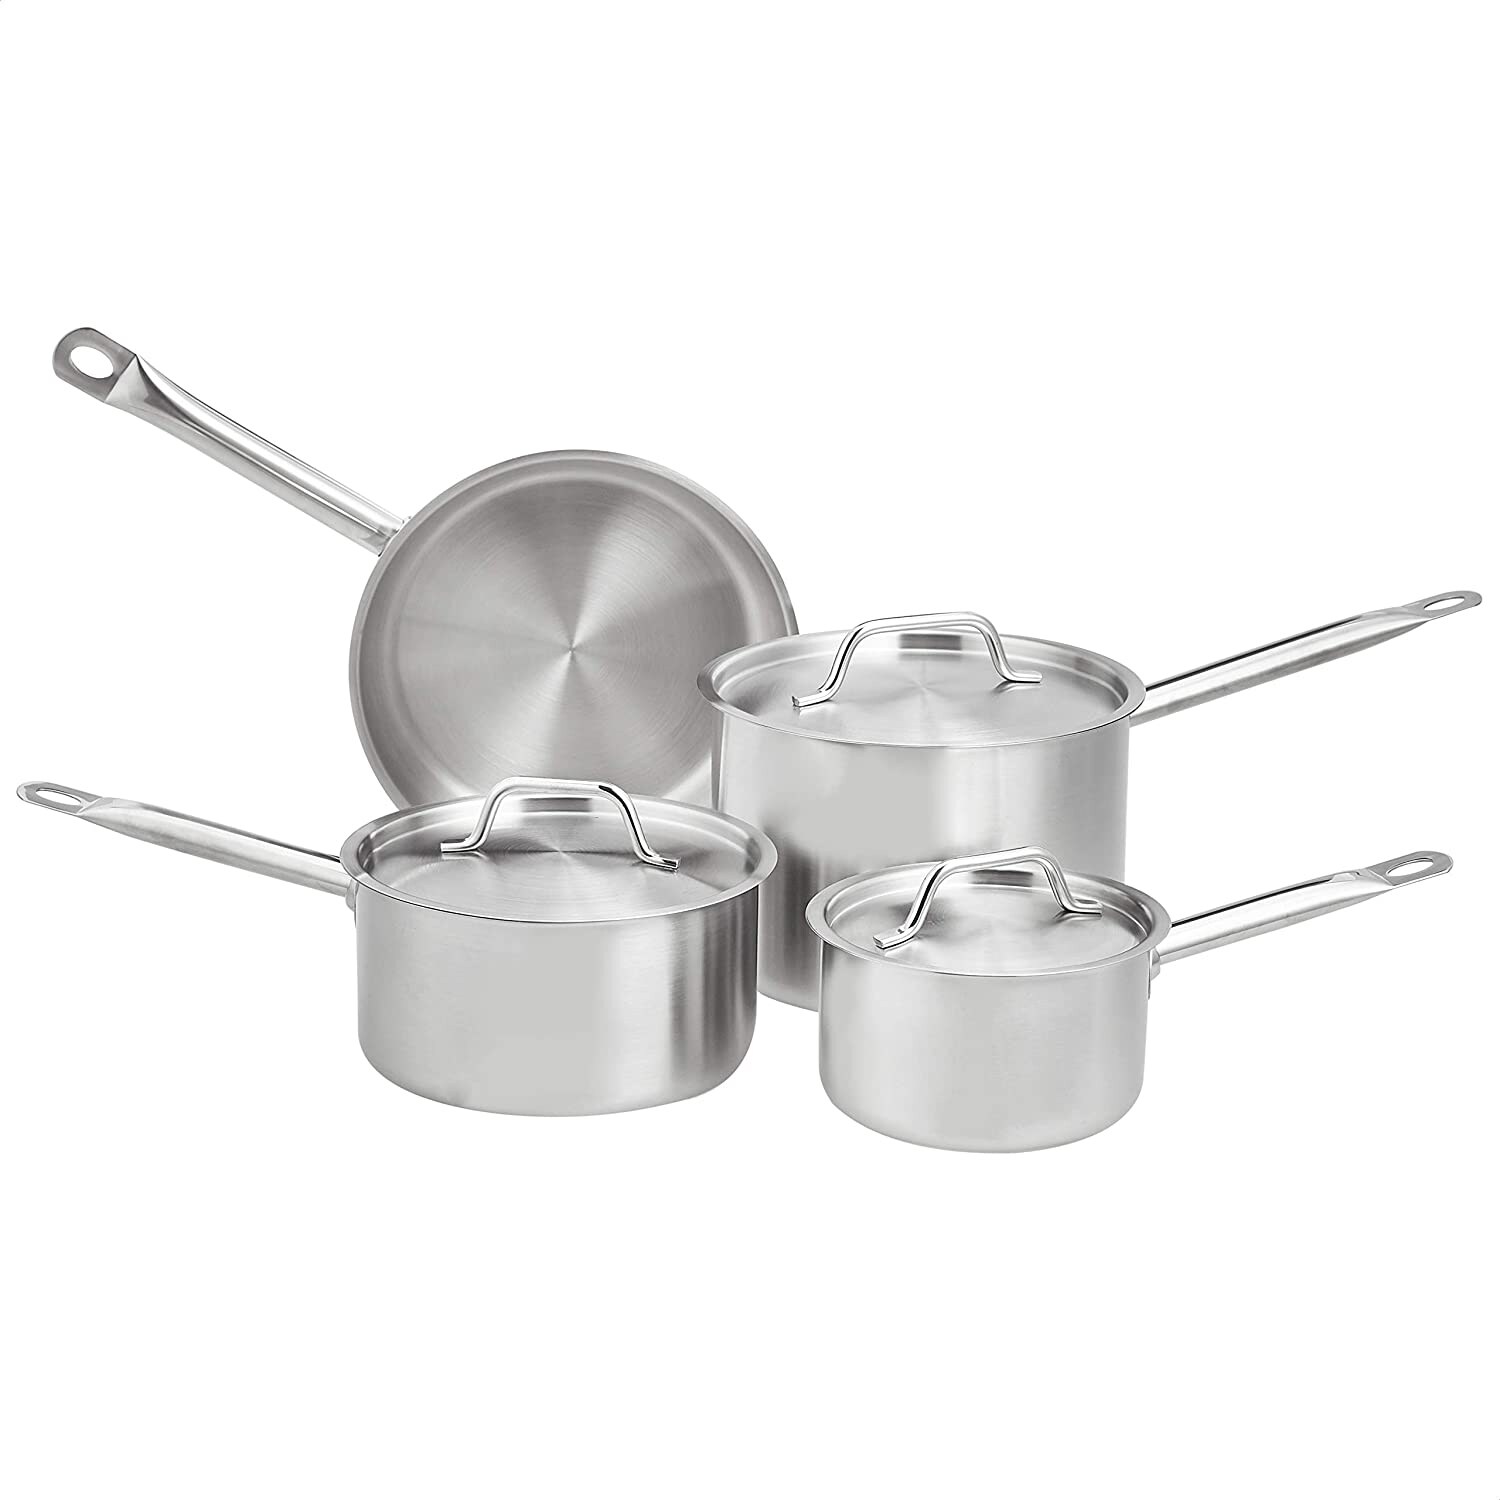 Stainless Steel 7 Piece Cookware Set, Induction Ready